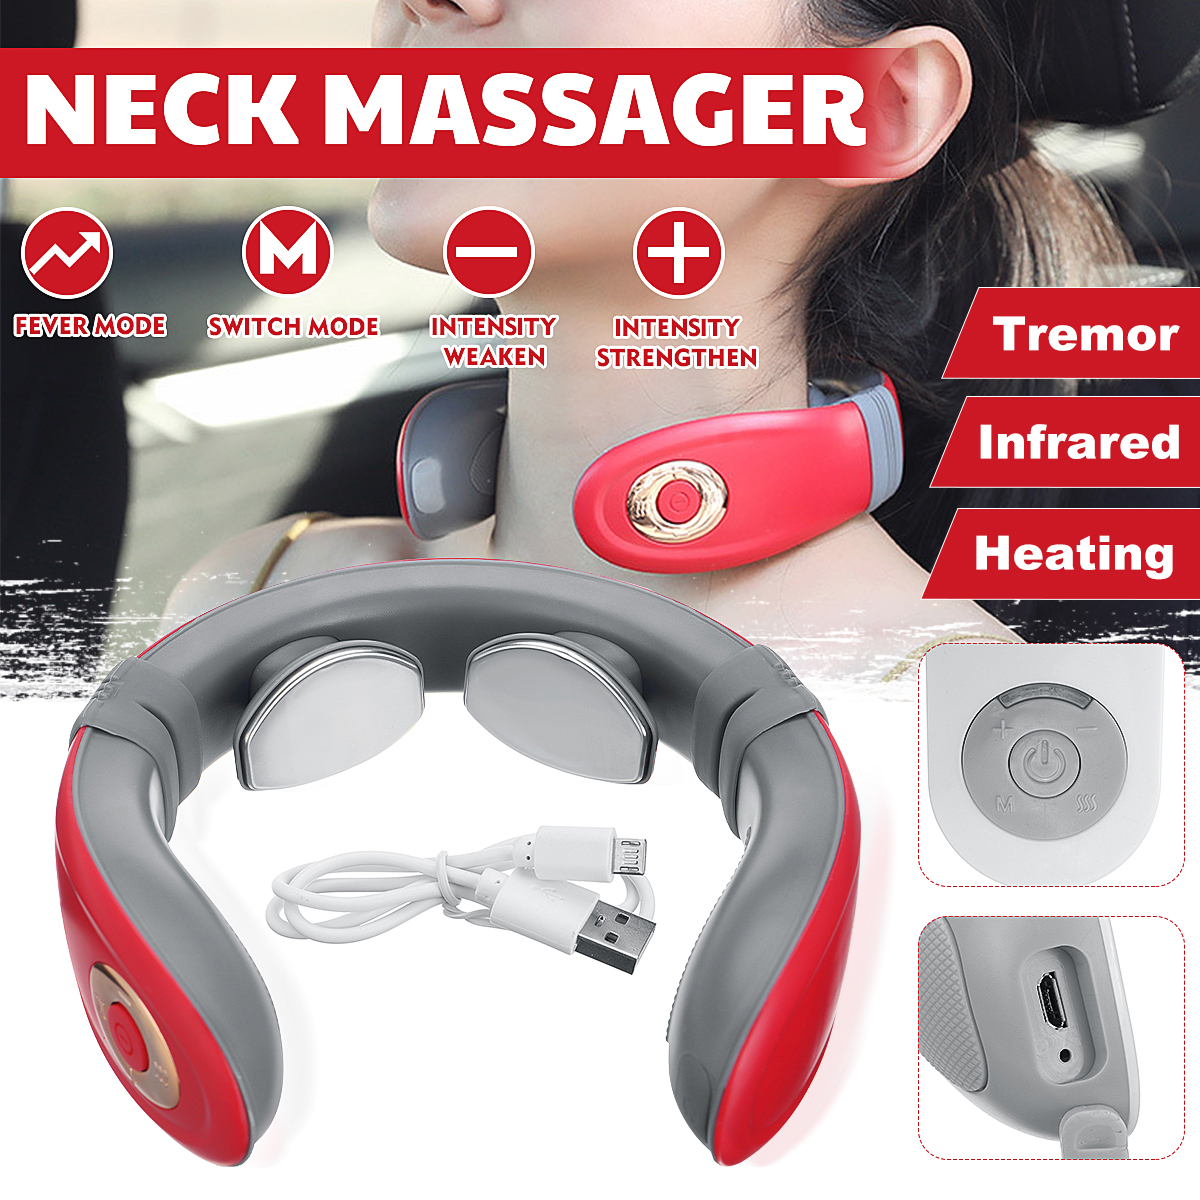 15 Gear Smart Viabration Neck Cervical Pain Relief Massager Electromagnetic Shock Massage With Far Infrared Heating Electric Massager